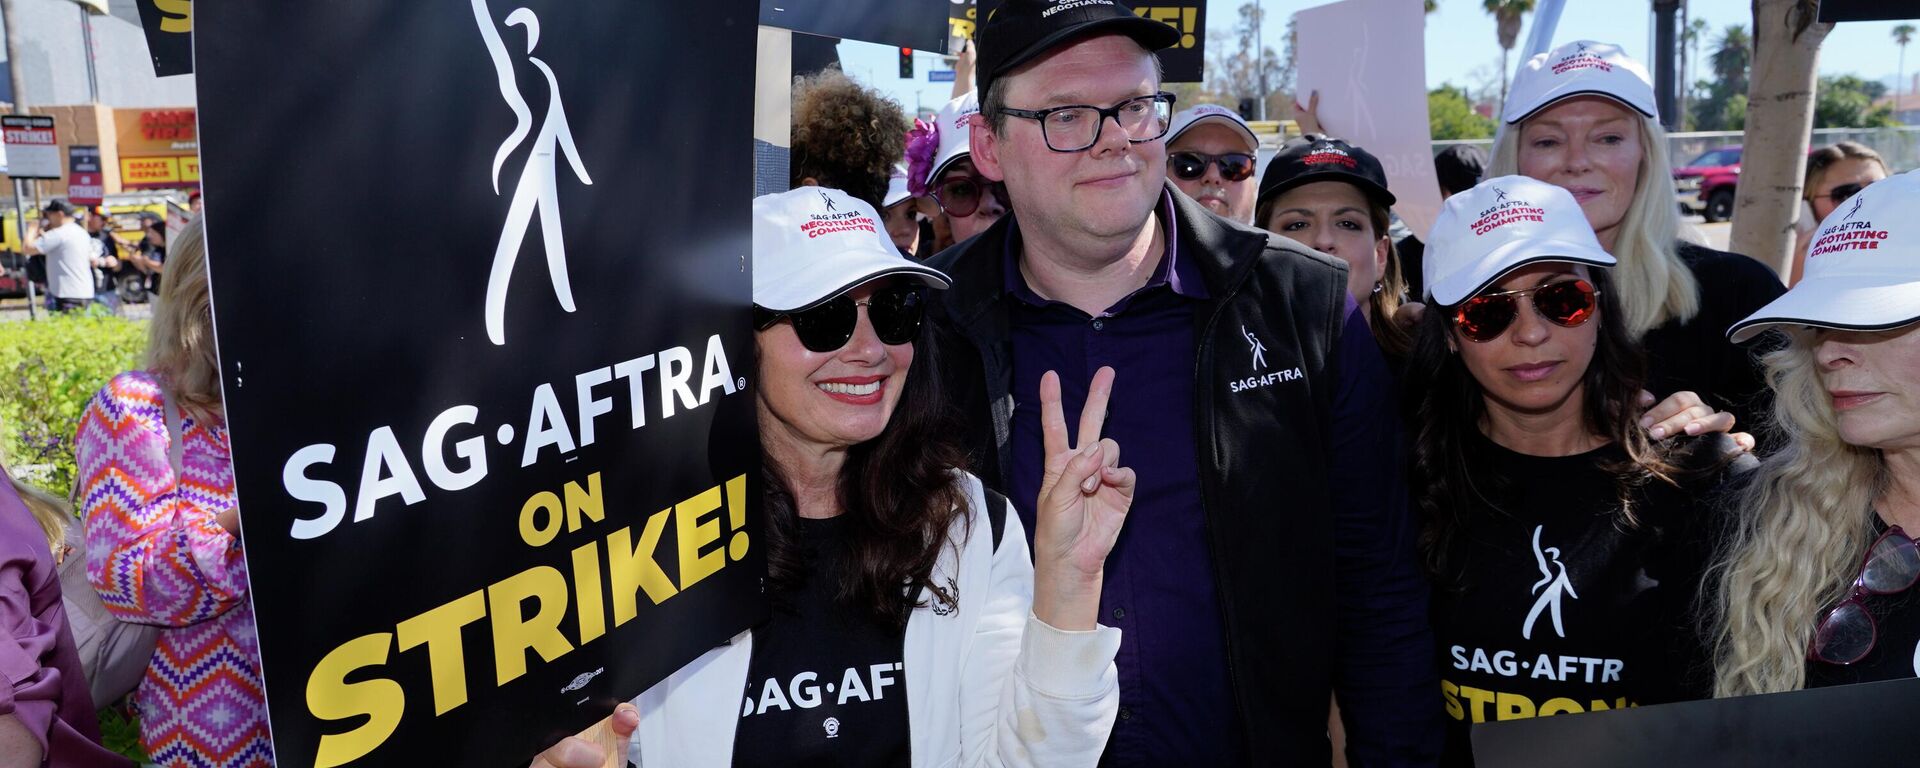 SAG-AFTRA president Fran Drescher from left, Duncan Crabtree-Ireland, SAG-AFTRA national executive director and chief negotiator, and actor Frances Fisher, at far right, take part in a rally by striking writers and actors outside Netflix studio in Los Angeles on Friday, July 14, 2023. This marks the first day actors formally joined the picket lines, more than two months after screenwriters began striking in their bid to get better pay and working conditions.  - Sputnik International, 1920, 15.07.2023